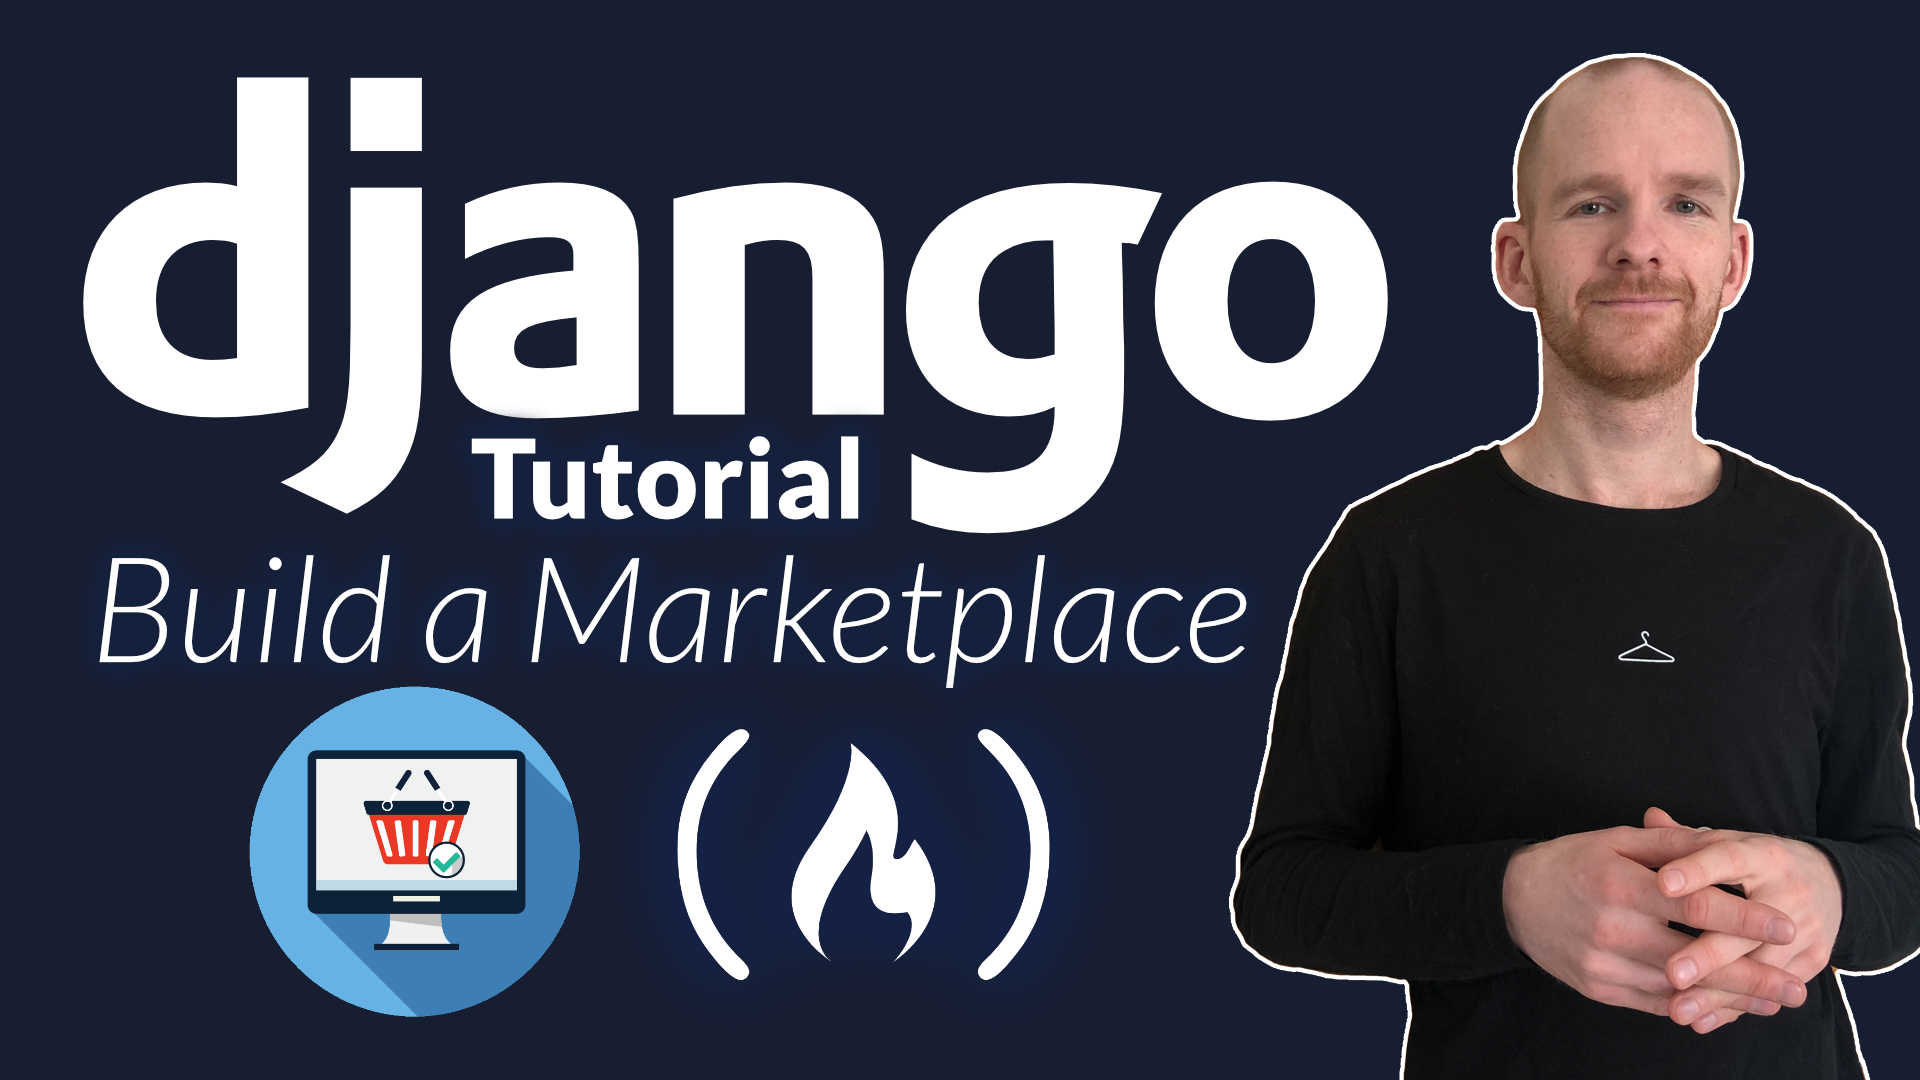 Learn Django by Building a Marketplace